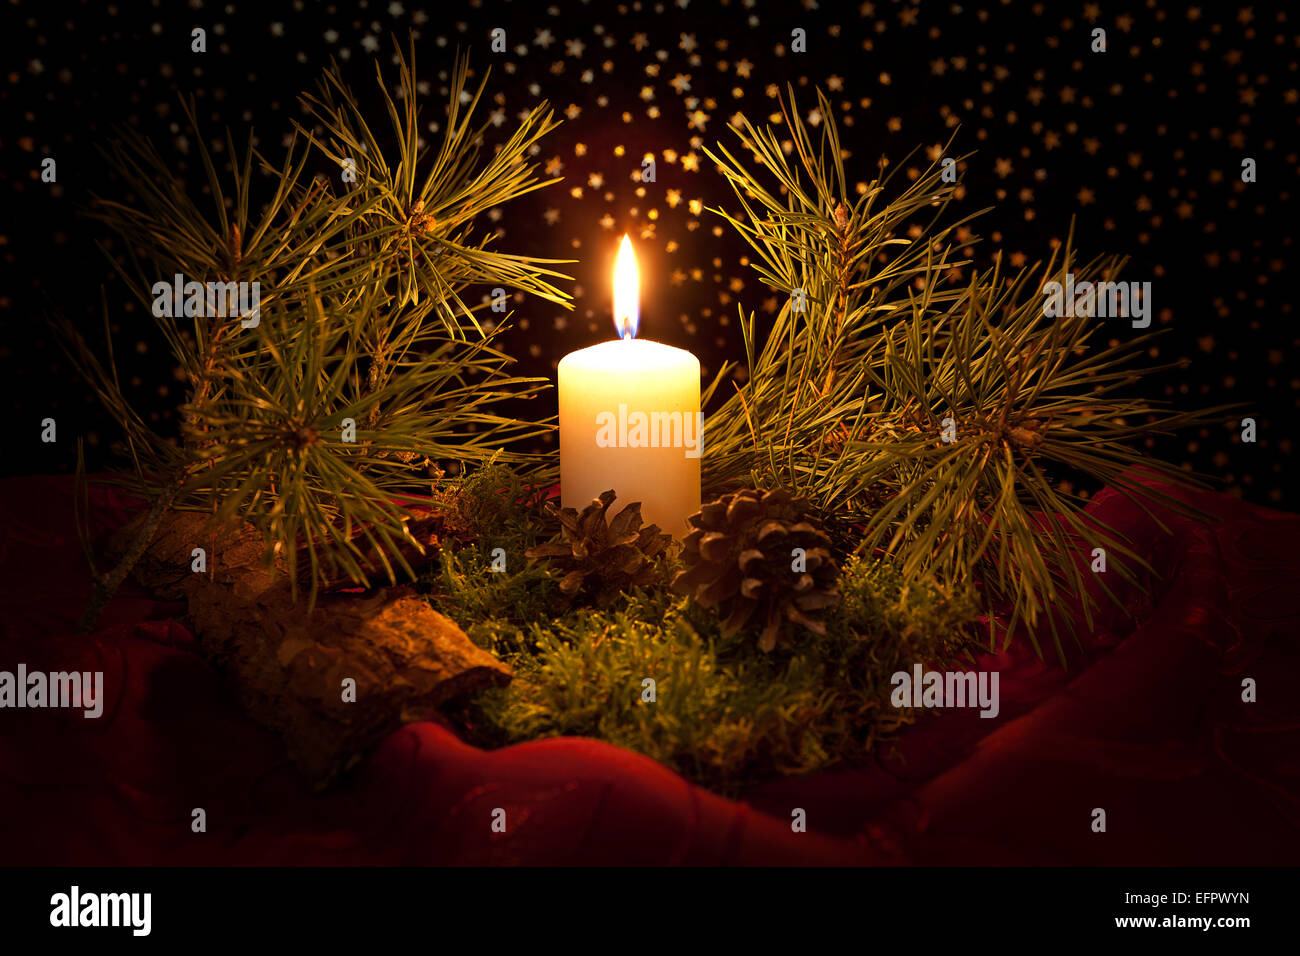 Christmas still life with candlelight Stock Photo